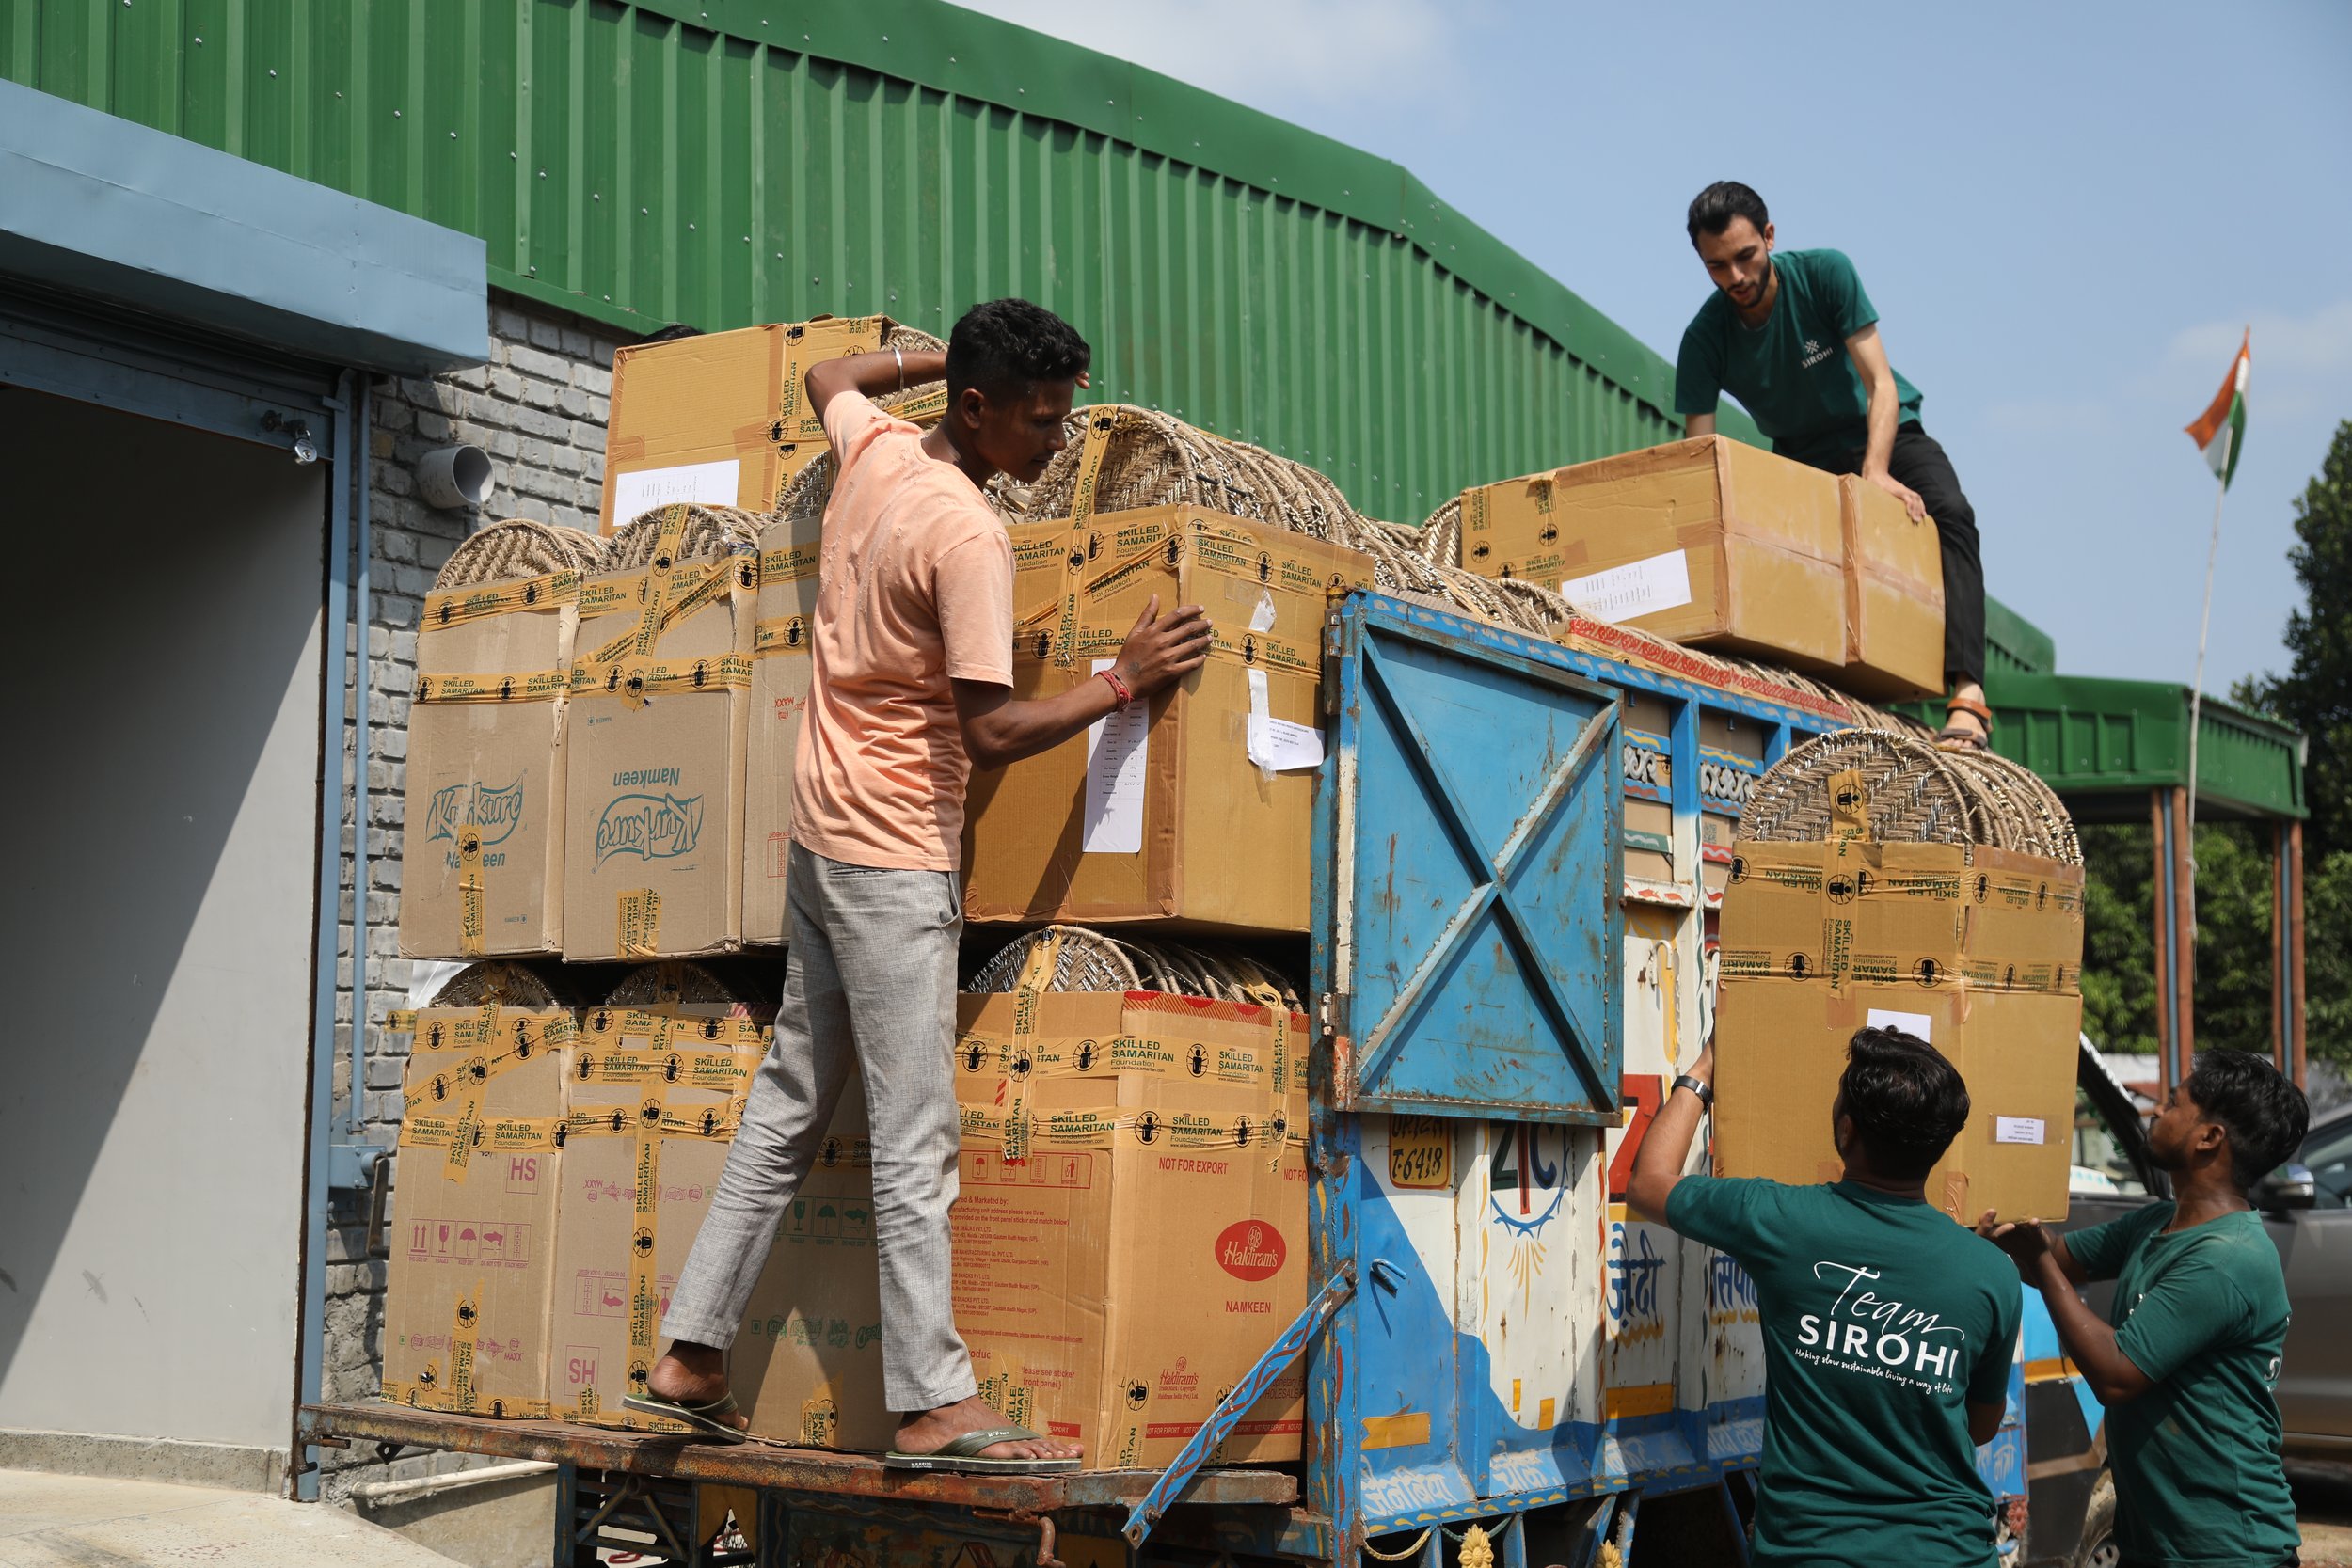 Employees of Sirohi in Muzaffarnager can be seen here loading finished products onto a delivery truck. The Sirohi factory stores finished goods, which are quality-inspected and packaged for delivery.